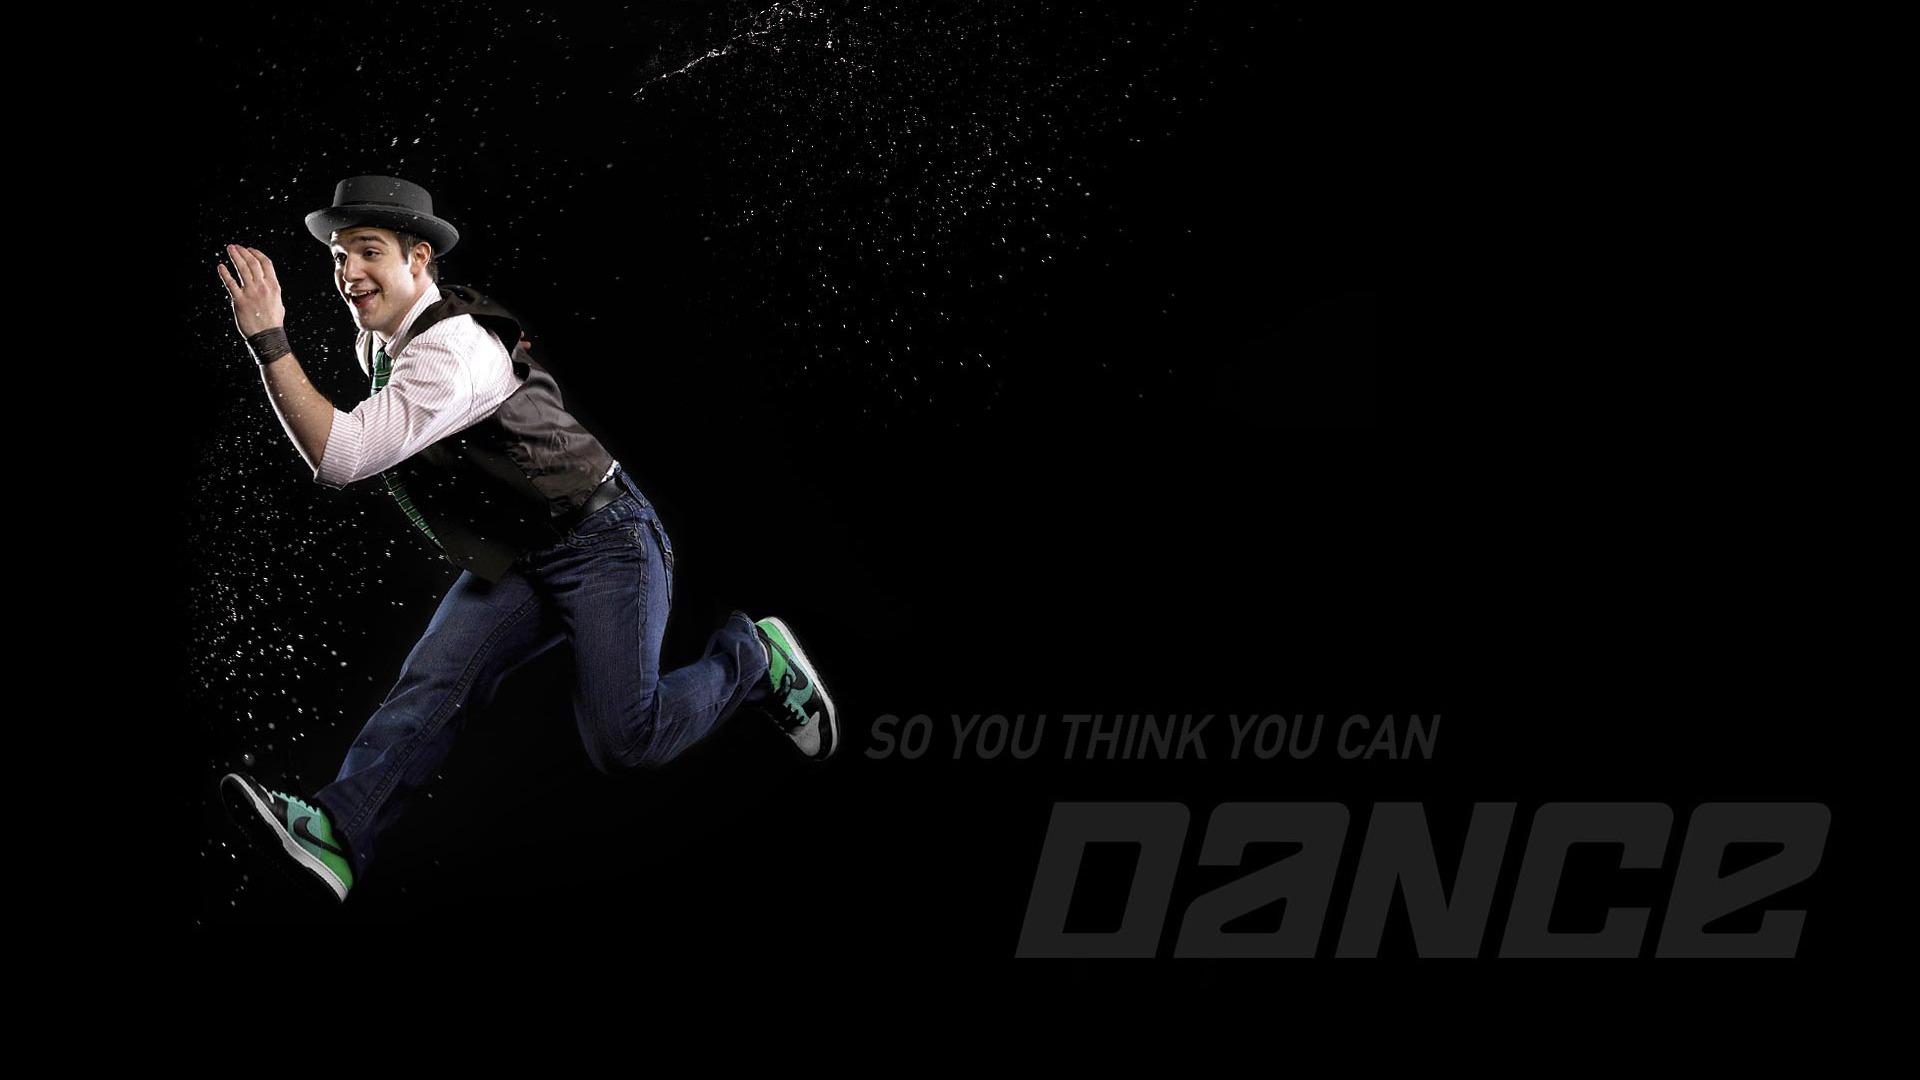 So You Think You Can Dance 舞林爭霸壁紙(一) #14 - 1920x1080